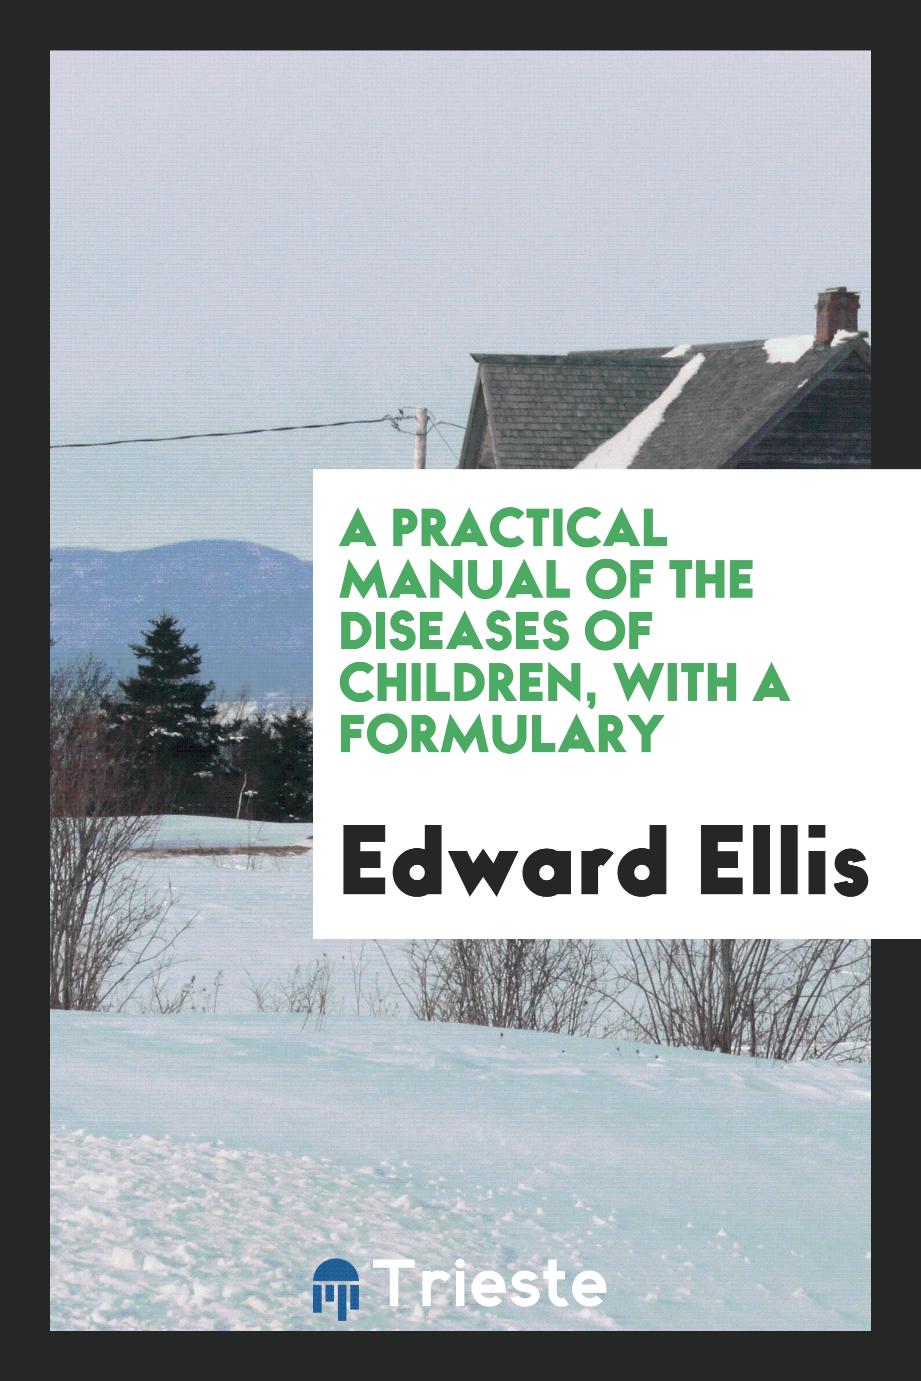 A Practical Manual of the Diseases of Children, with a Formulary